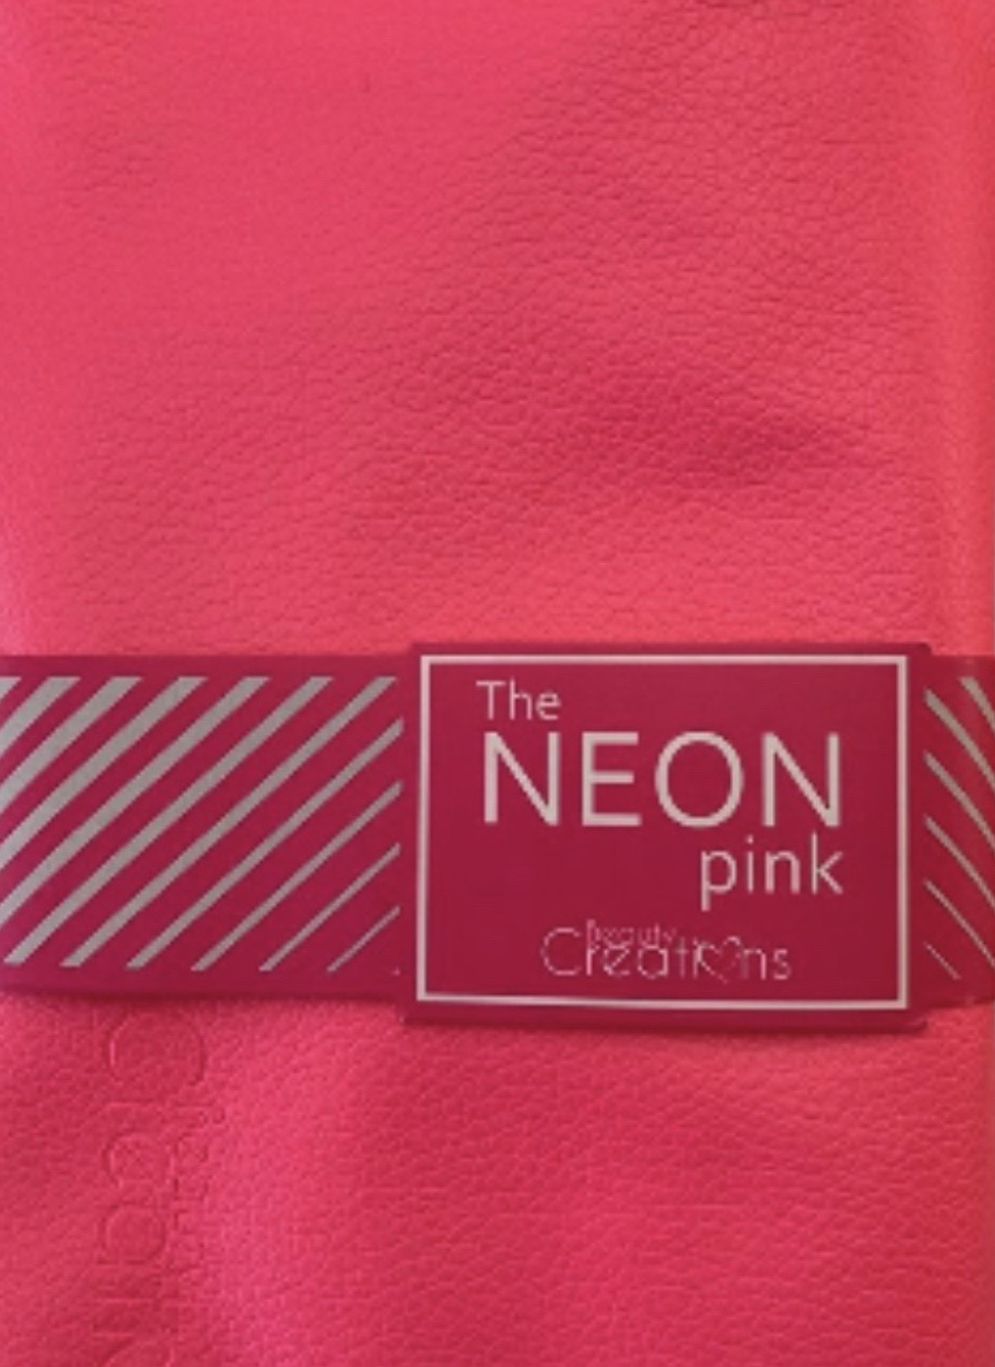 Beauty Creations Neon brushes